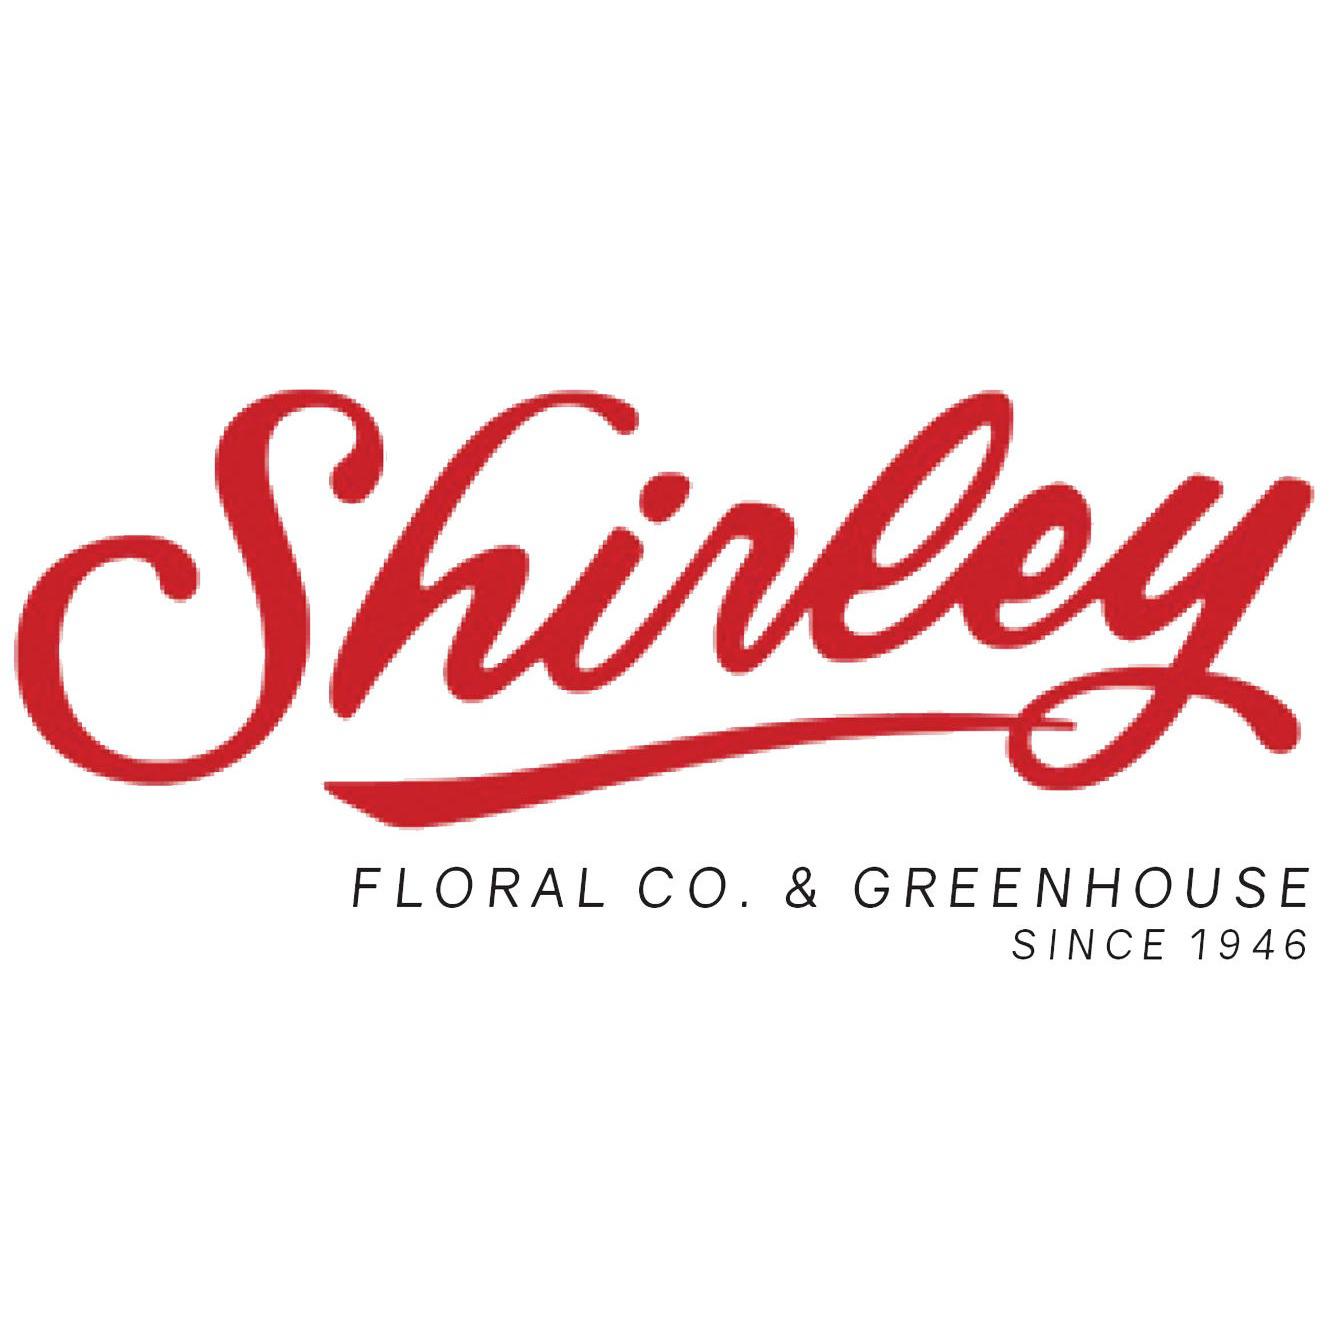 Shirley Floral Company